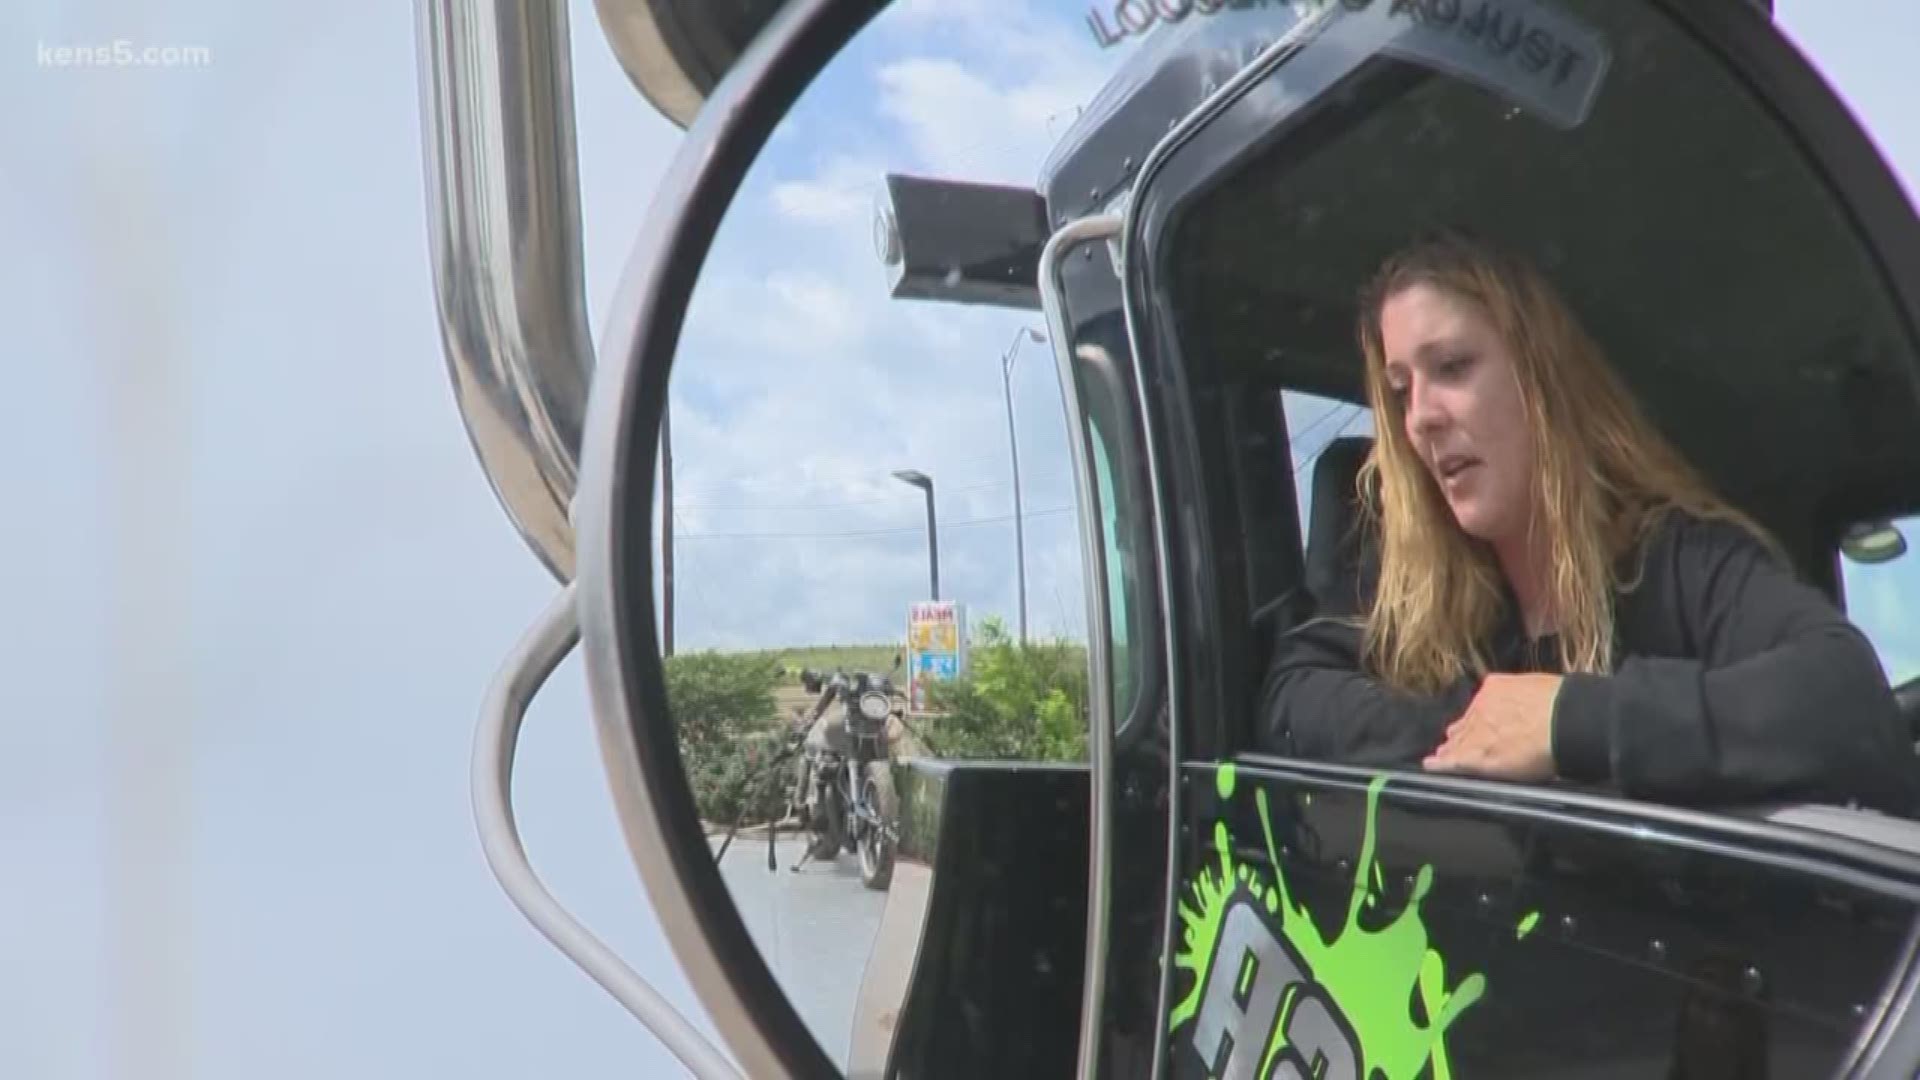 San Antonio is home to a lot of women who are breaking barriers in some unexpected industries. Audrey Castoreno introduces us to a local heavy duty truck driver who is truly one of our city's leading ladies.